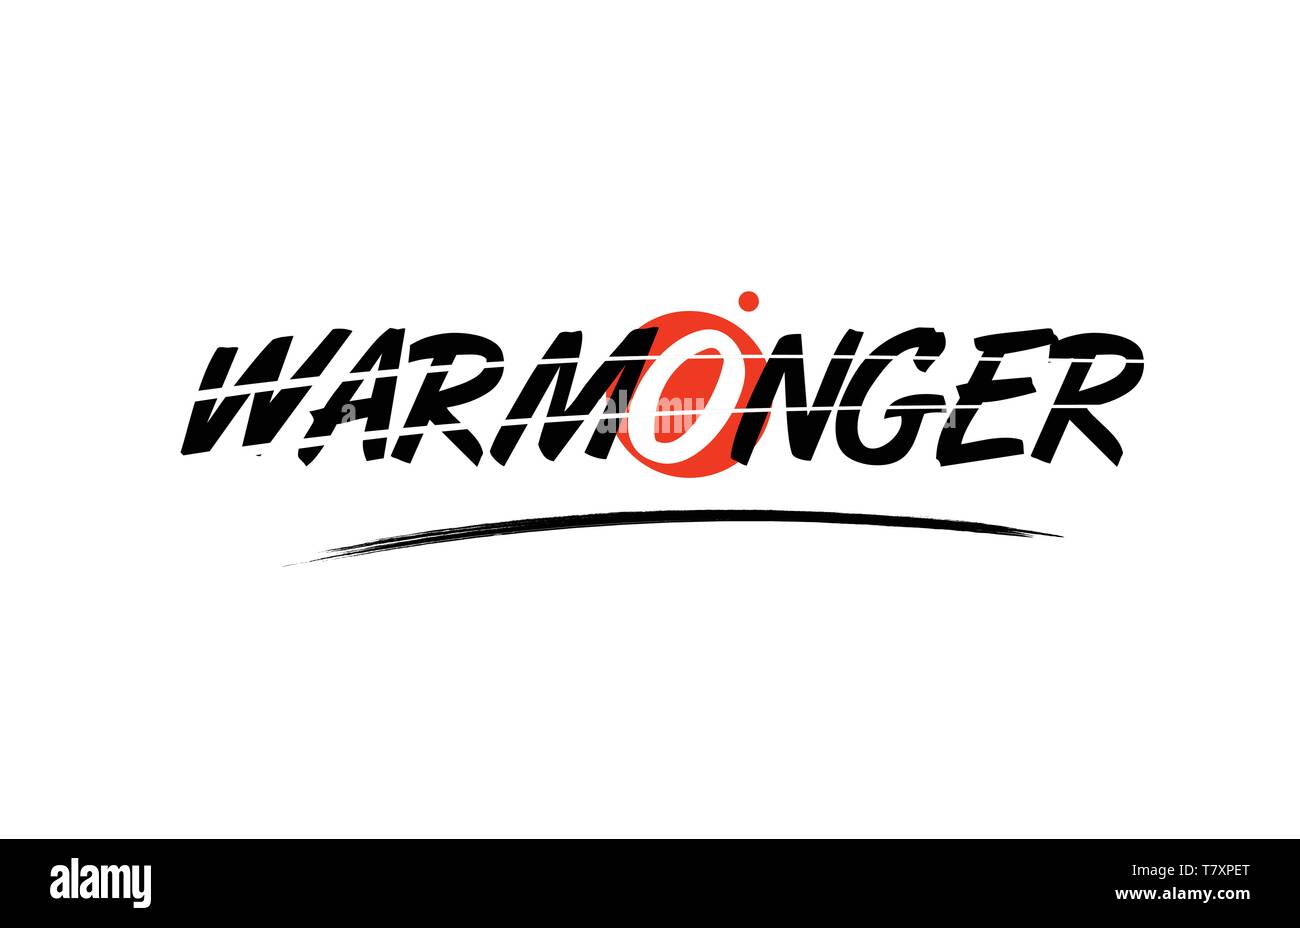 warmonger text word on white background with red circle suitable for card icon or typography logo design Stock Vector